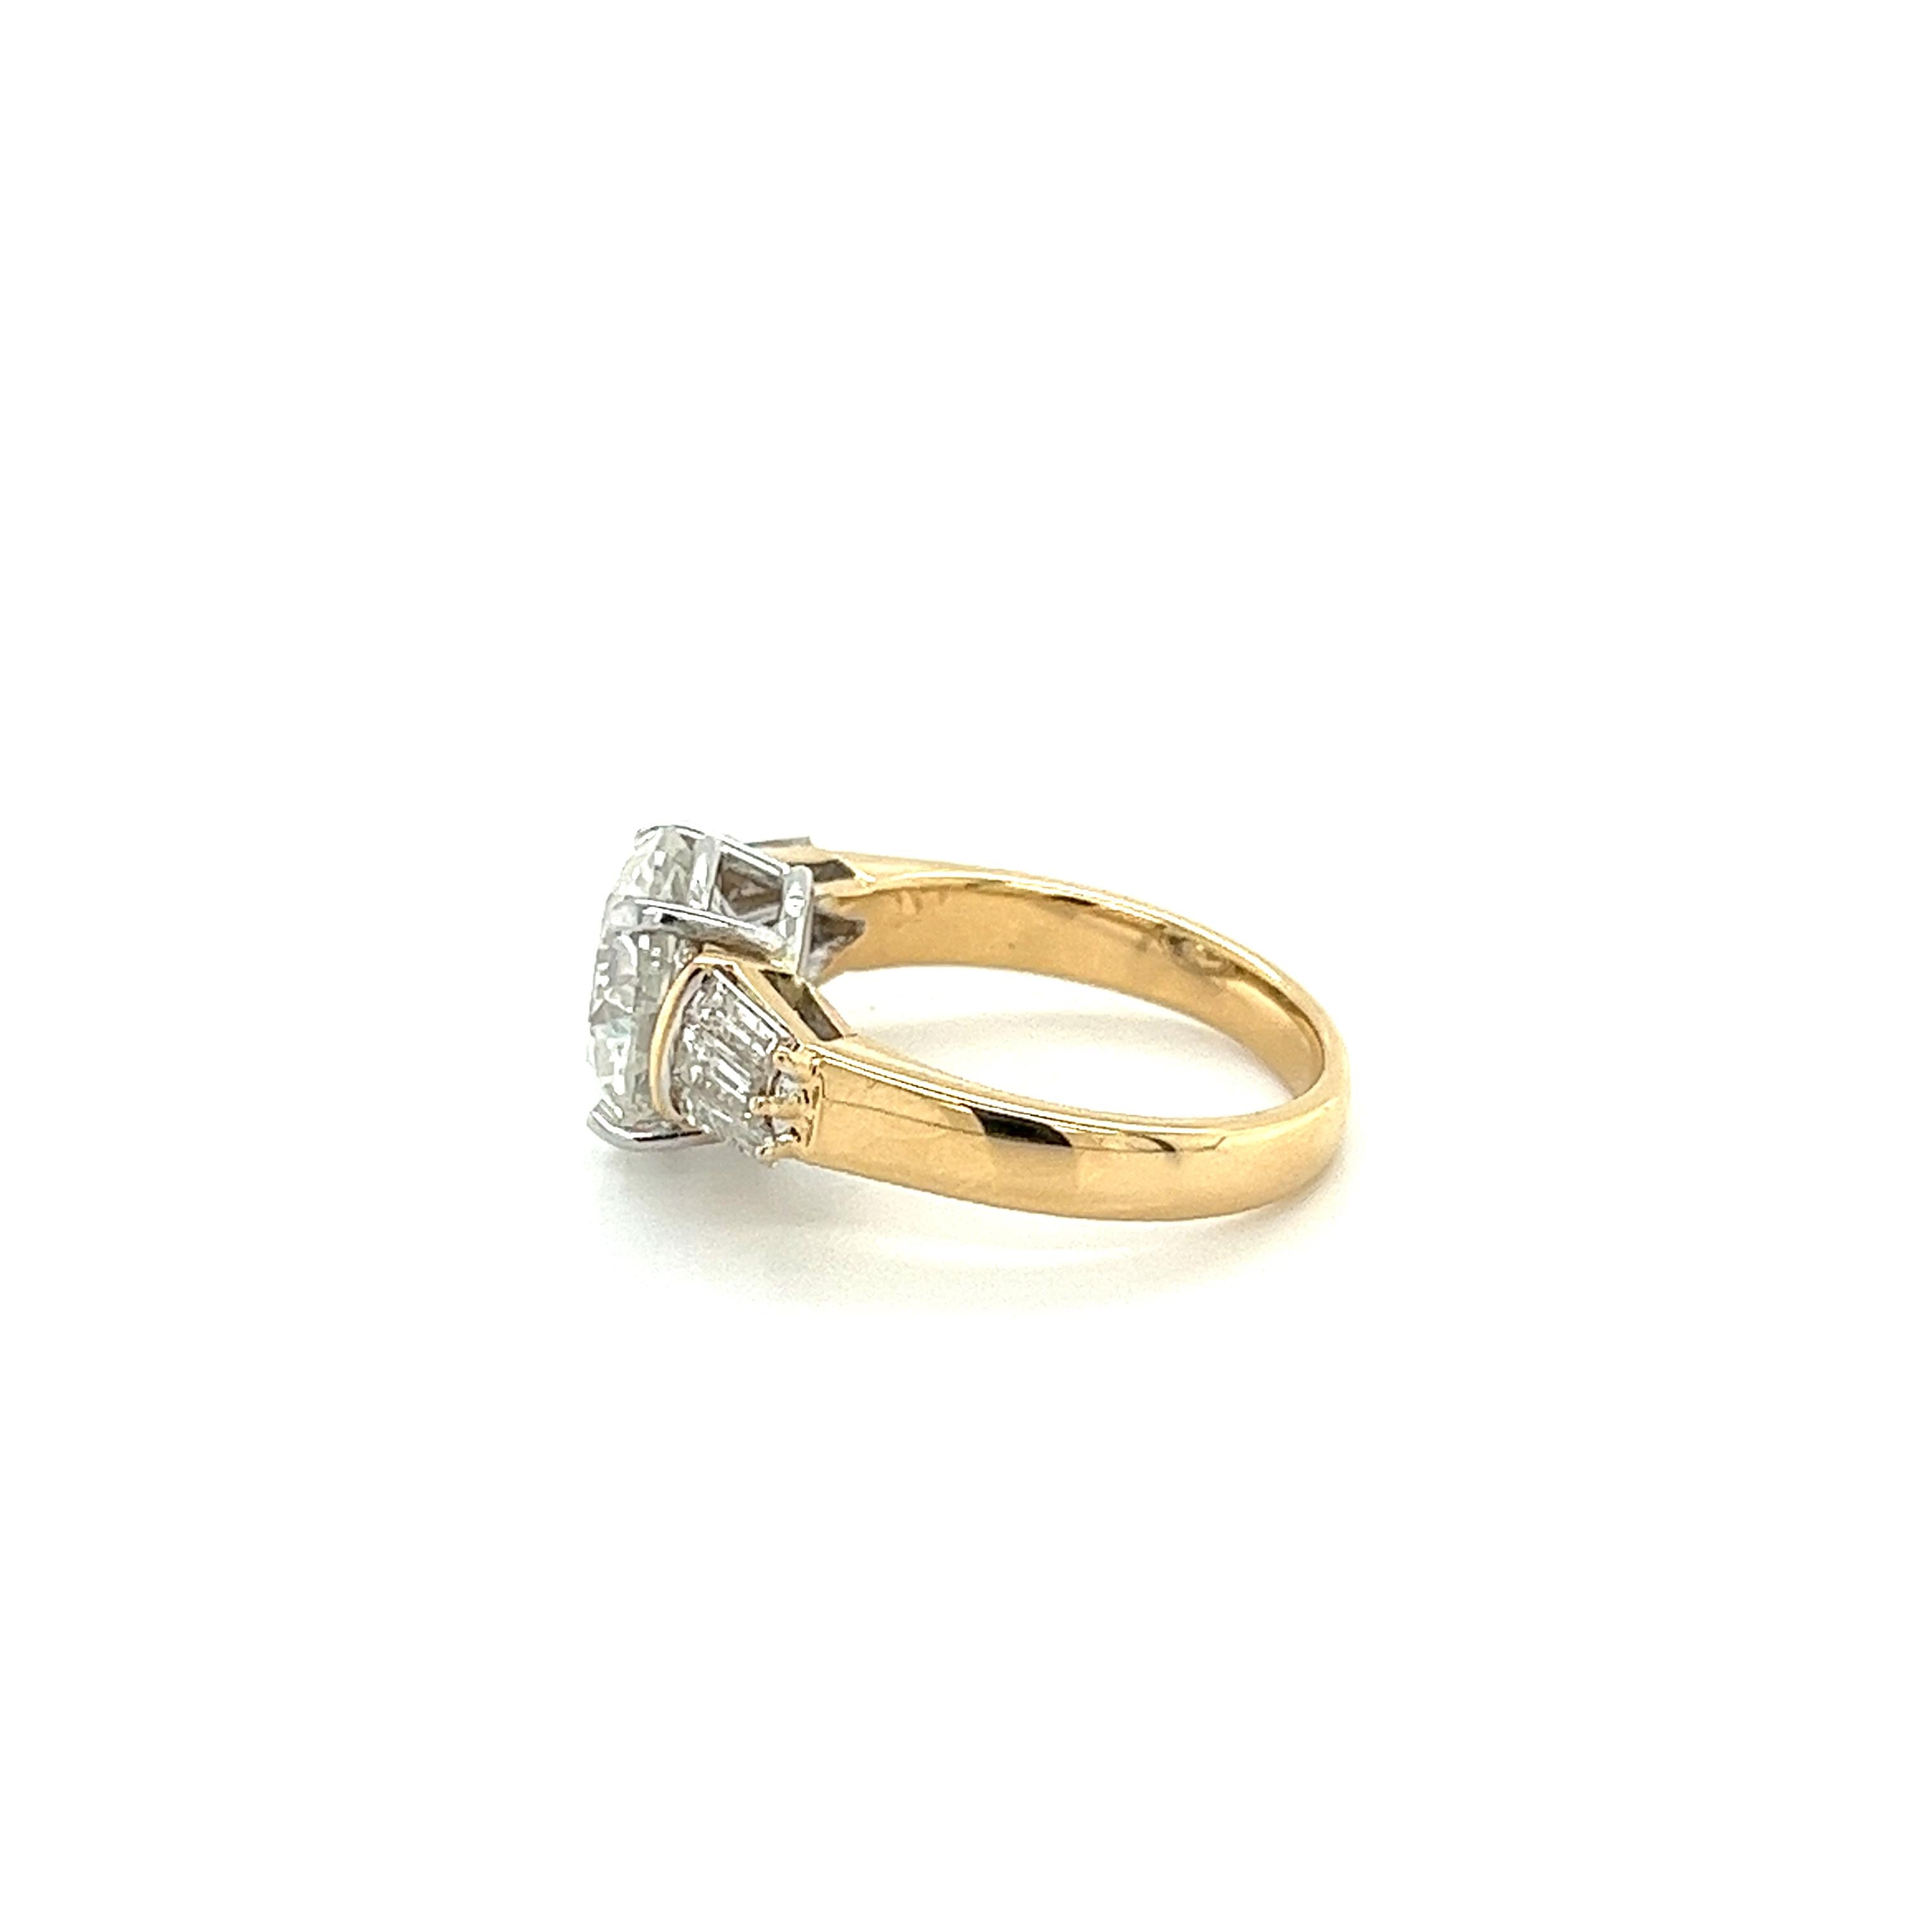 4.21 Carat Round Cut Diamond Engagement Ring With Baguettes in 2 Tone 18k Gold  For Sale 3